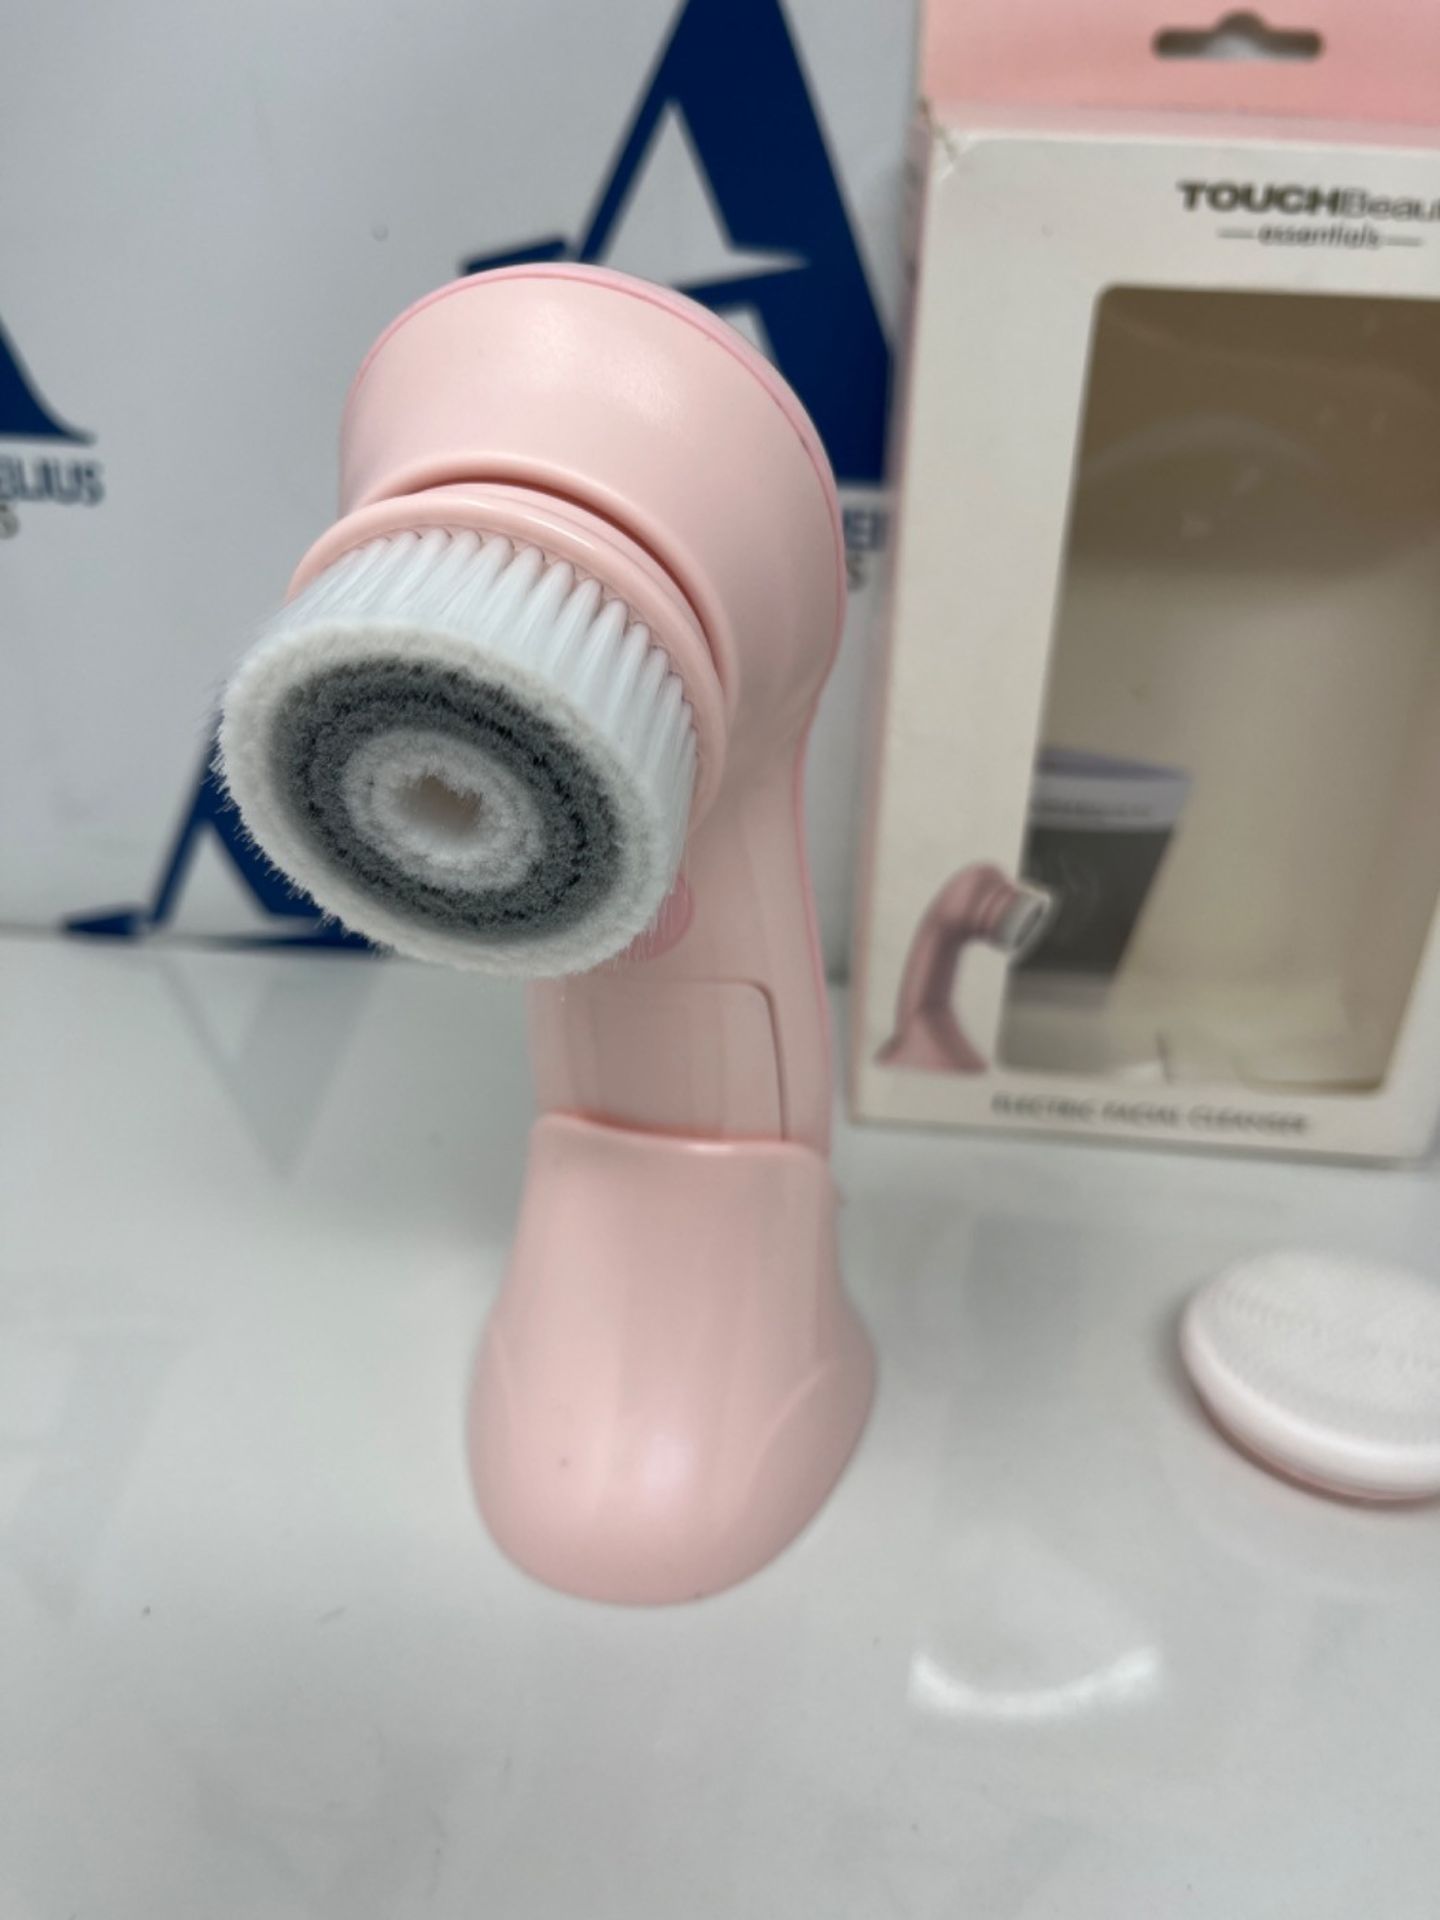 TOUCHBeauty Facial Cleansing Brush with Stand, Waterproof Spin Face Brush with 2 Modes - Image 2 of 2